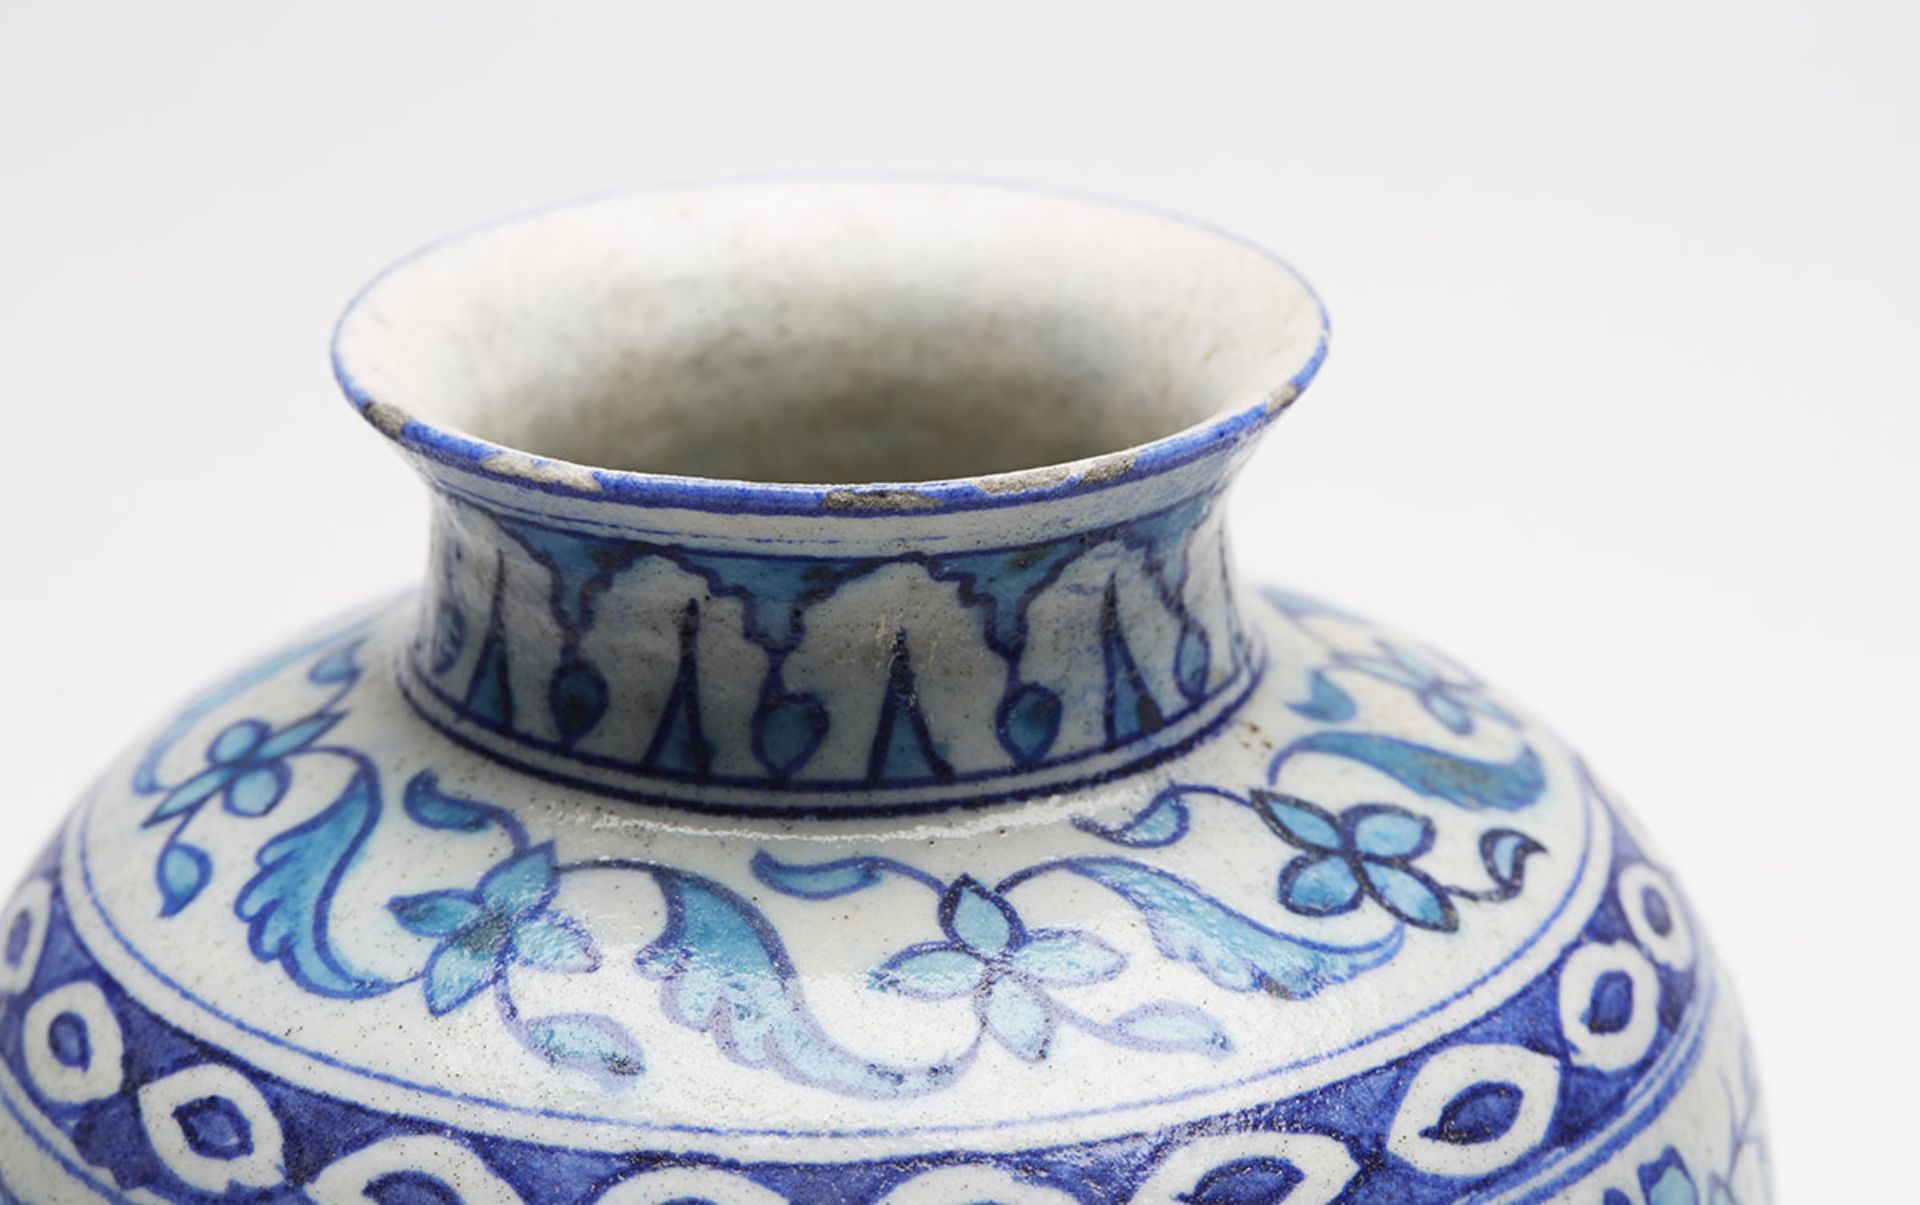 ANTIQUE MIDDLE EASTERN/INDIAN BLUE & WHITE VASE 19TH C.   DIMENSIONS   Height 13,5cm, Diameter 14, - Image 3 of 9